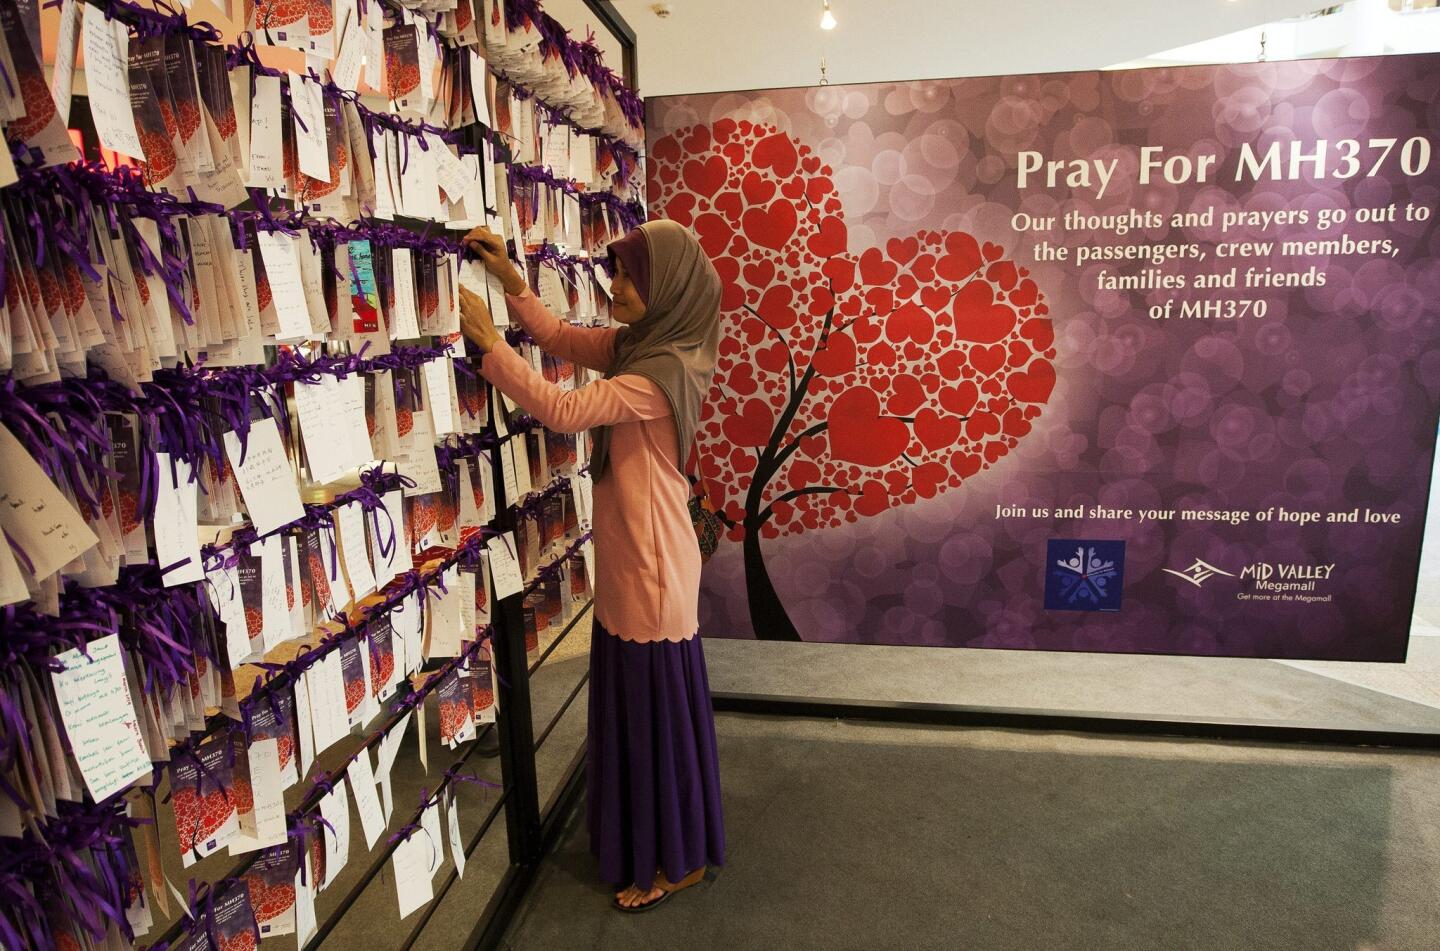 A visitor hangs a message of hope for passengers and crew of the missing Malaysian Airline plane at a shopping mall in Kuala Lumpur, Malaysia, 19 March 2014.